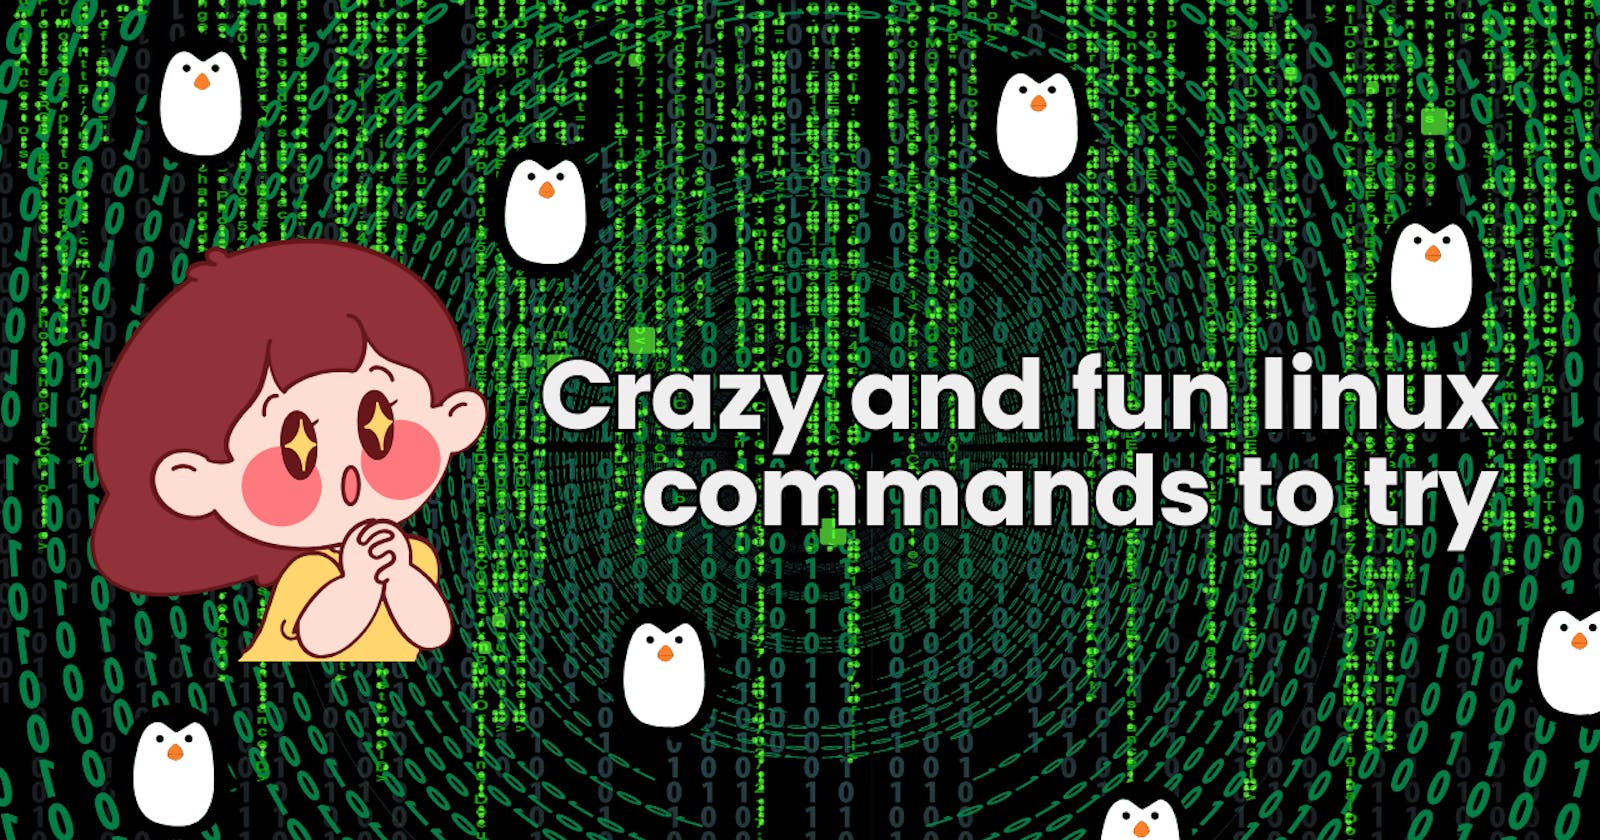 10 fun Linux commands to try out.